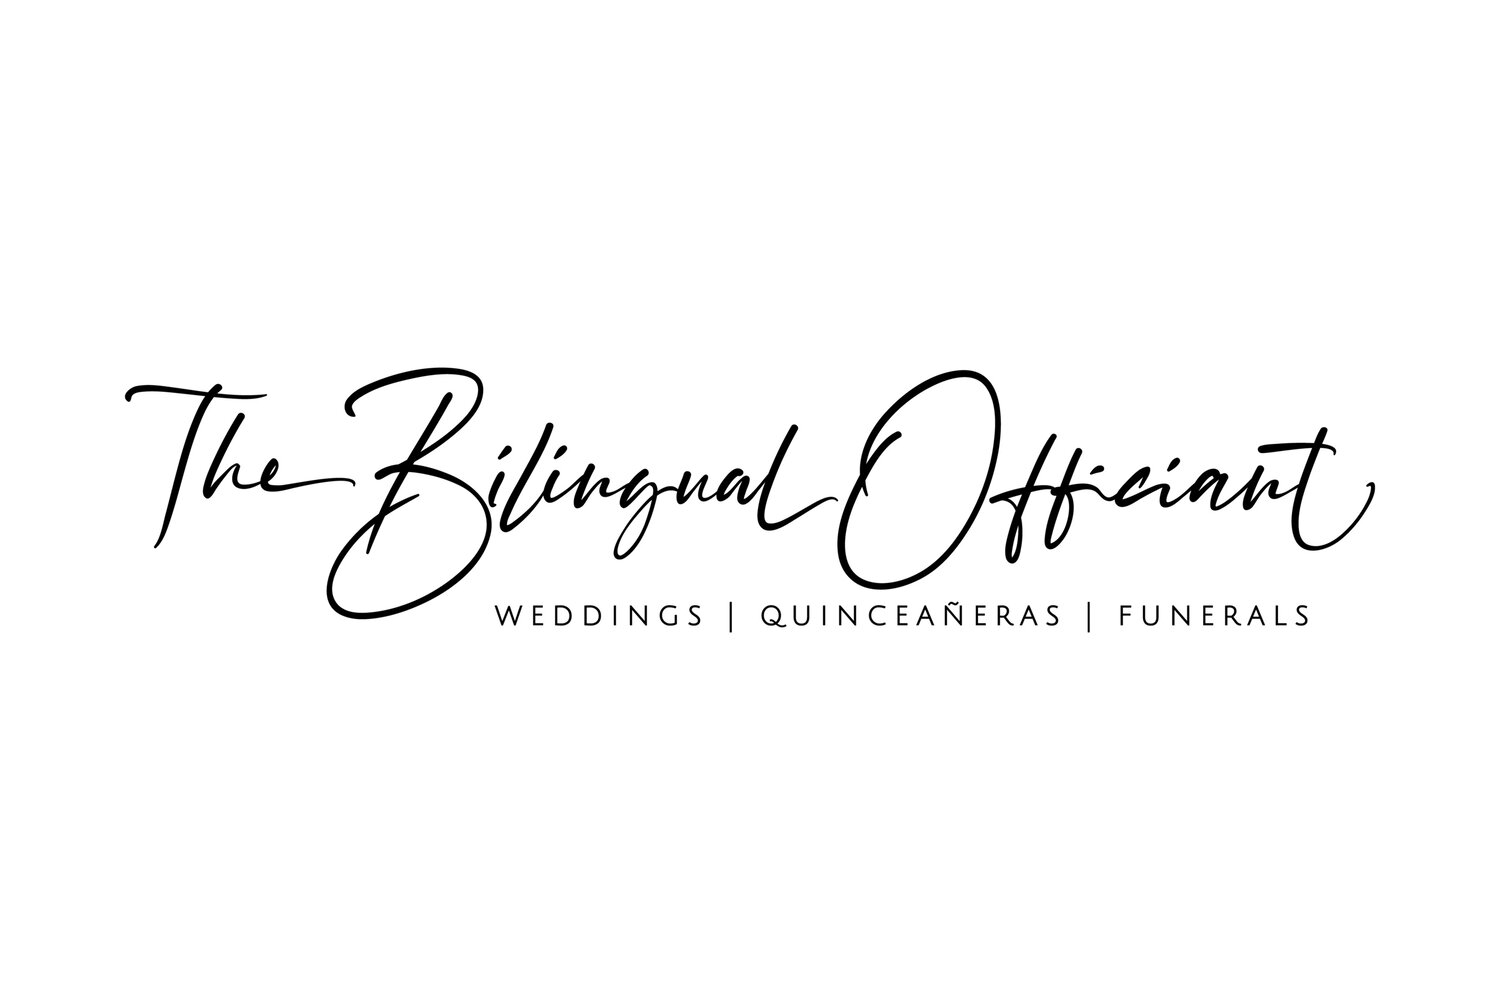 The Bilingual Officiant